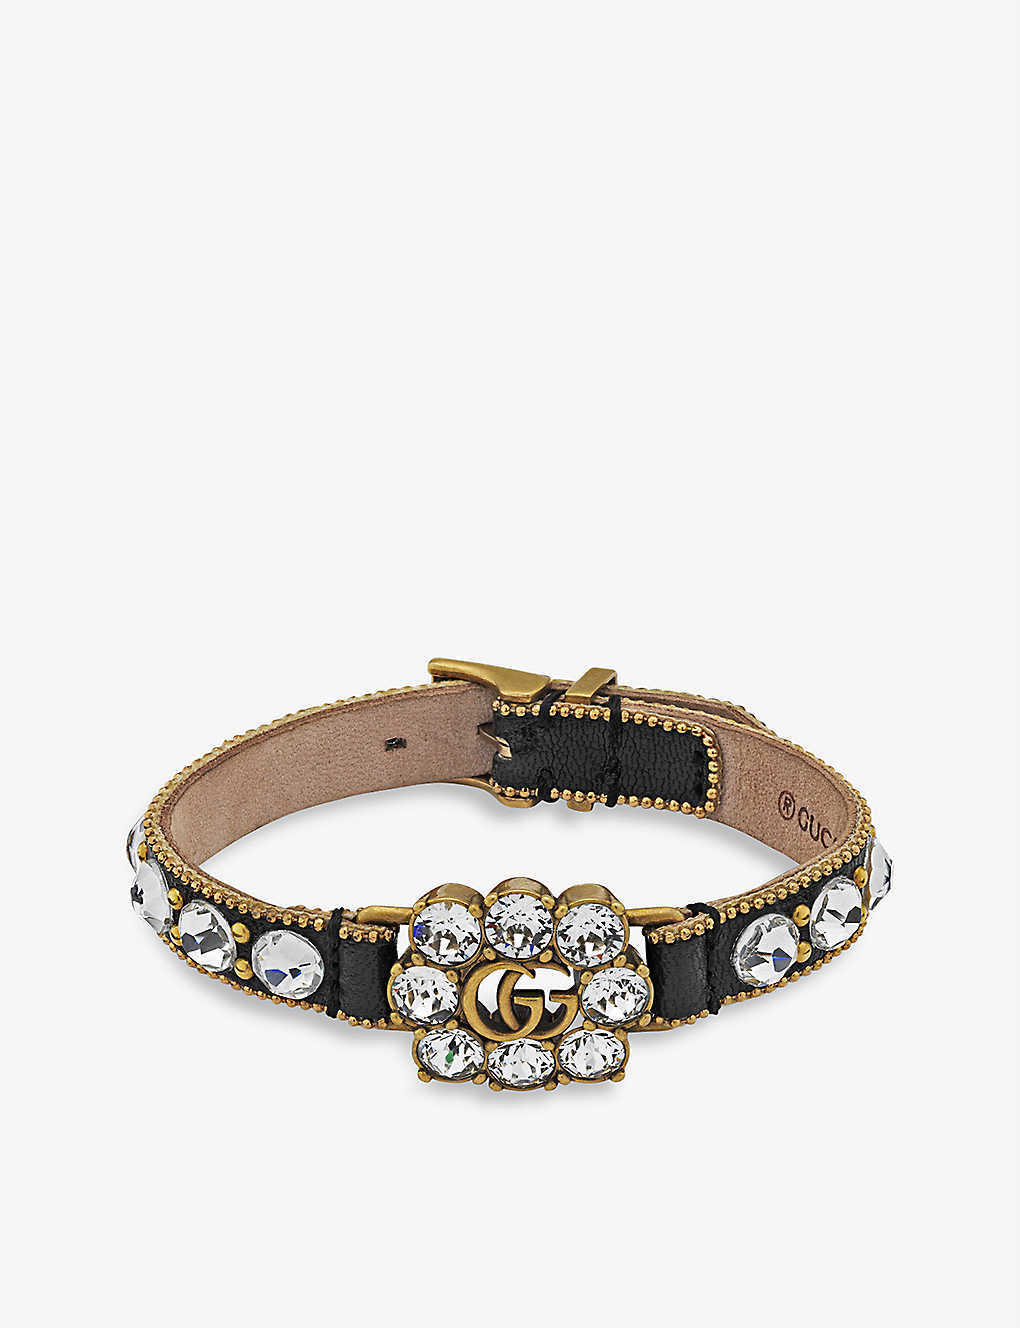 GG Marmont gold-tone brass, leather and crystal bracelet(9260717)